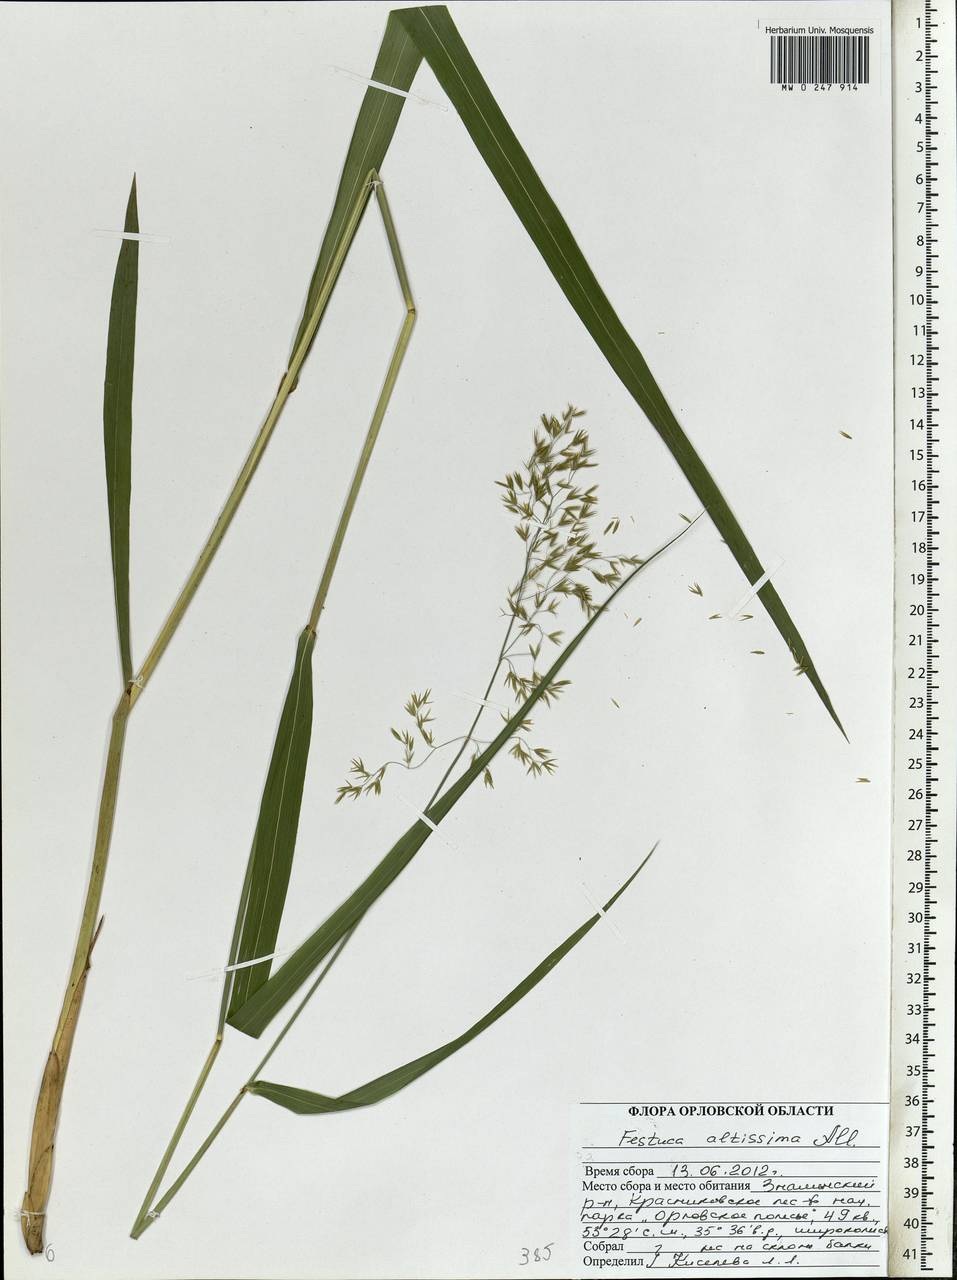 Festuca altissima All., Eastern Europe, Central forest-and-steppe region (E6) (Russia)